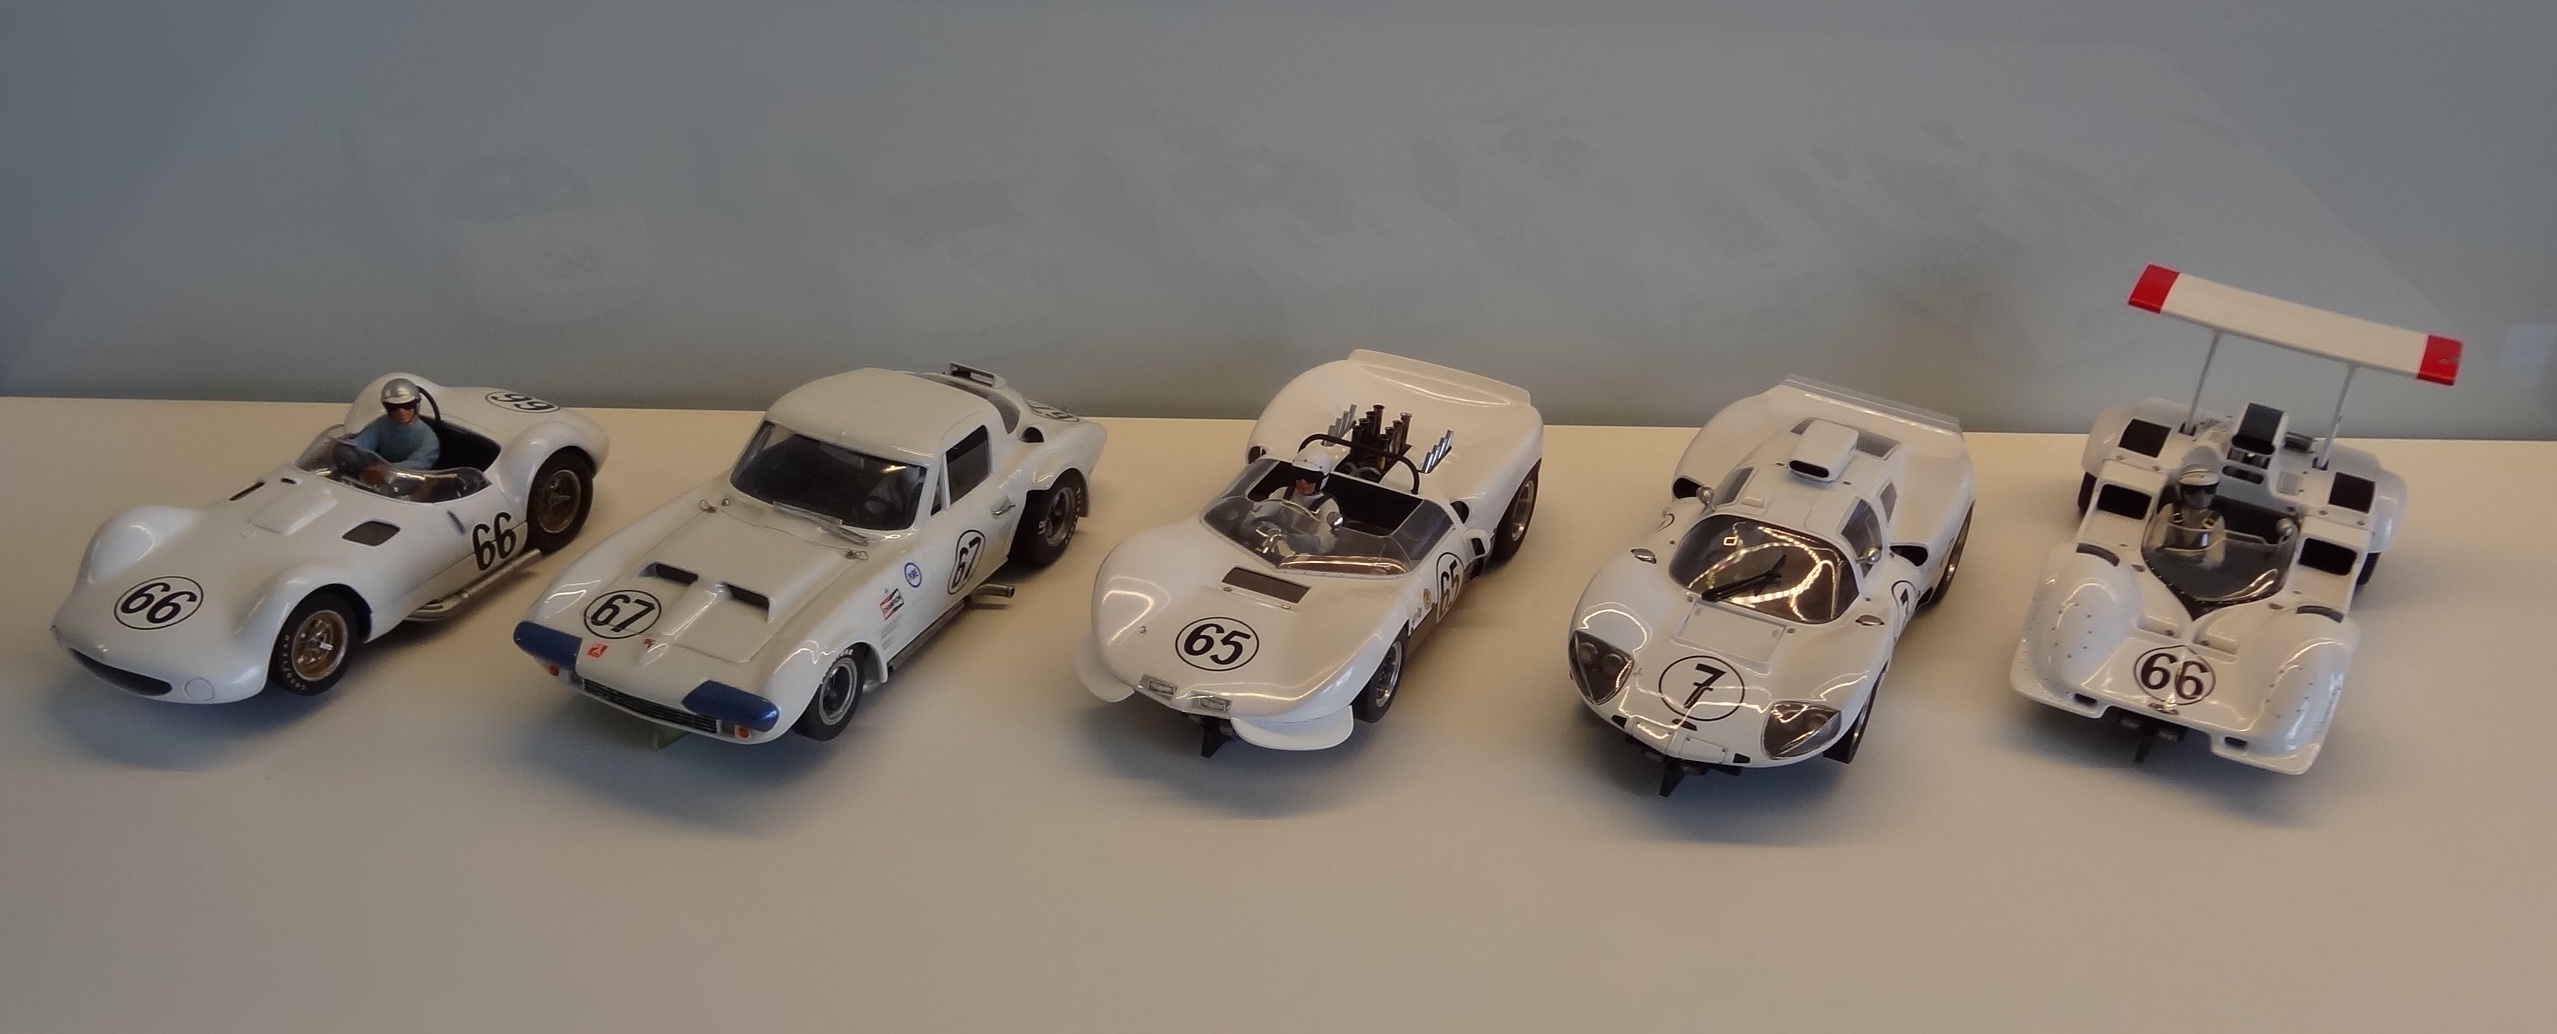 Chaparral - All Models in the YGR Collection - 1